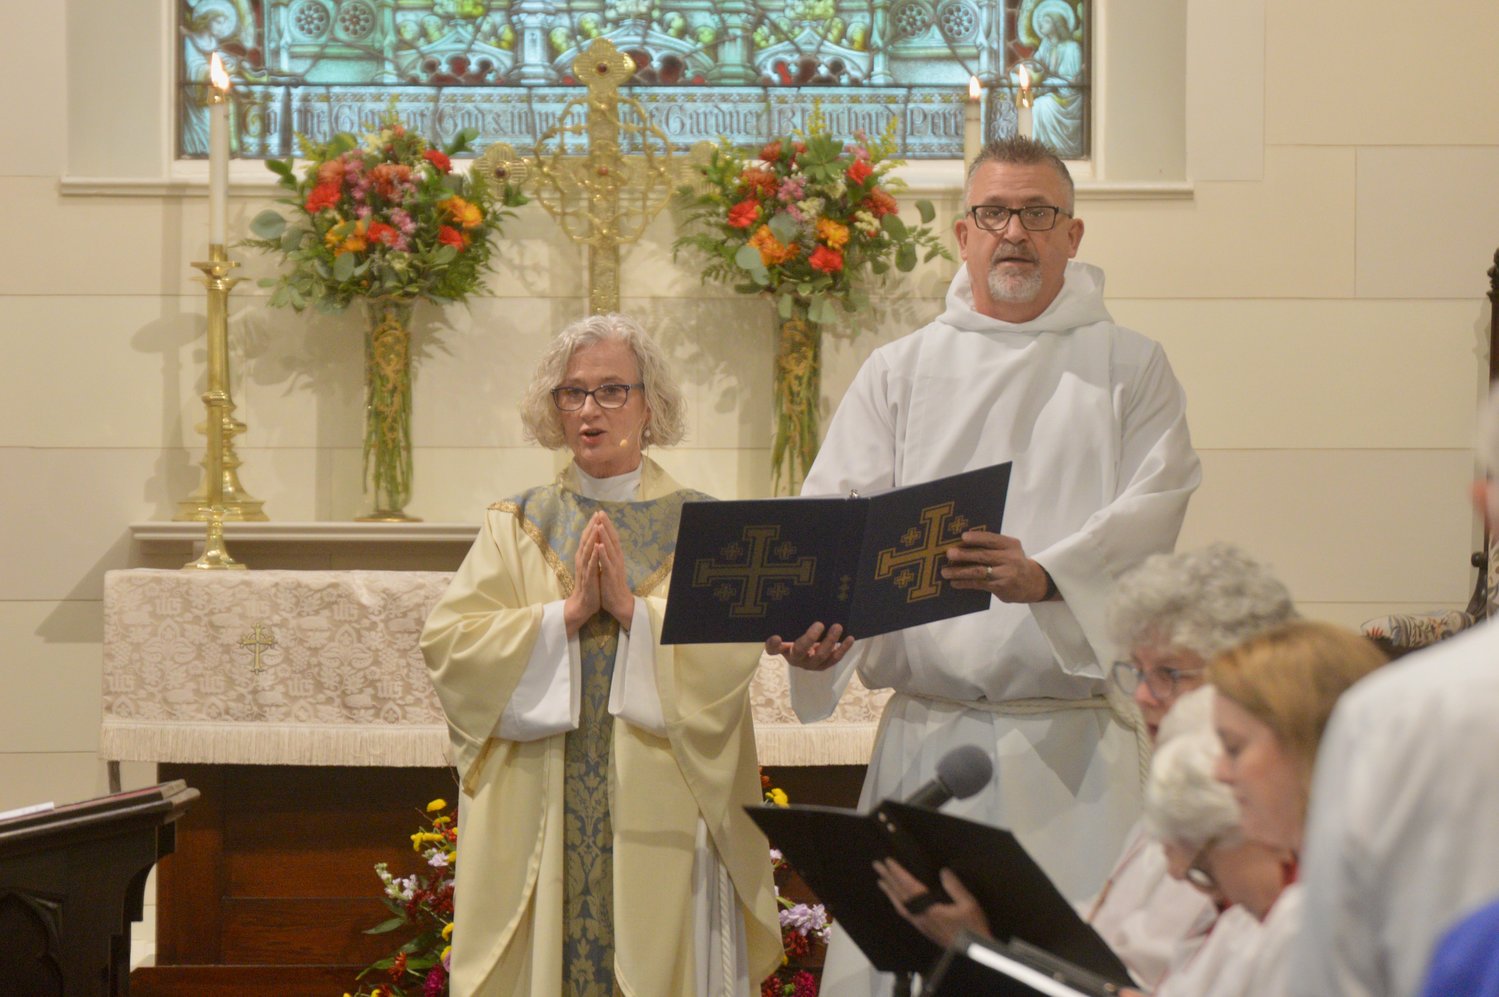 Paul Westrom, who led the first two phases of the church renovation project, holds a book of readings for The Rev. Jennifer Pedrick, rector of St. Mary’s Episcopal Church.